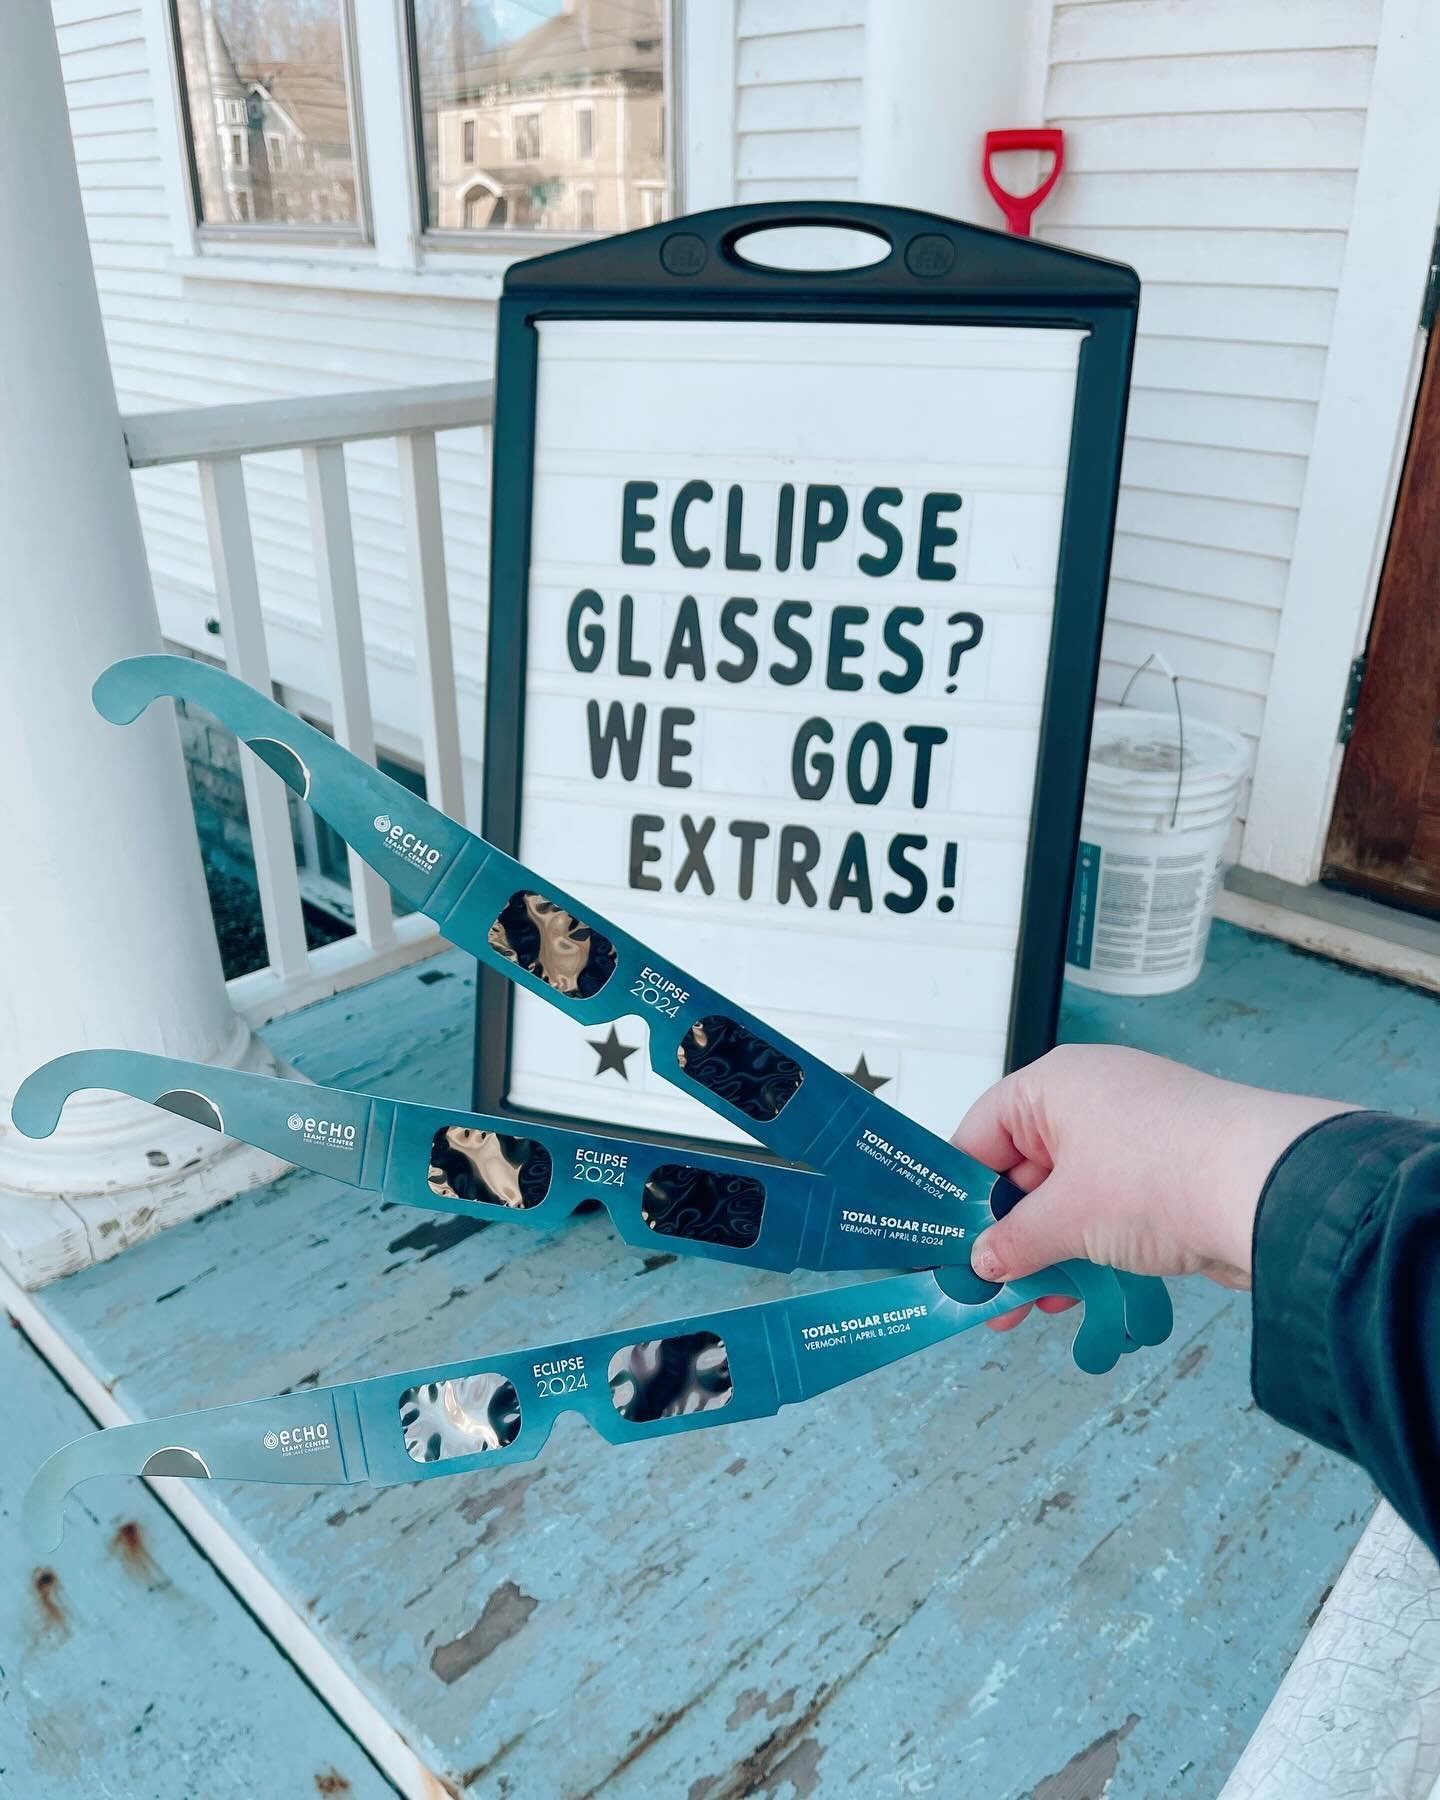 Forget to get a pair of glasses for the eclipse? We got extras! Stop by the library between 10 am and 1 pm to pick up glasses before the eclipse starts!